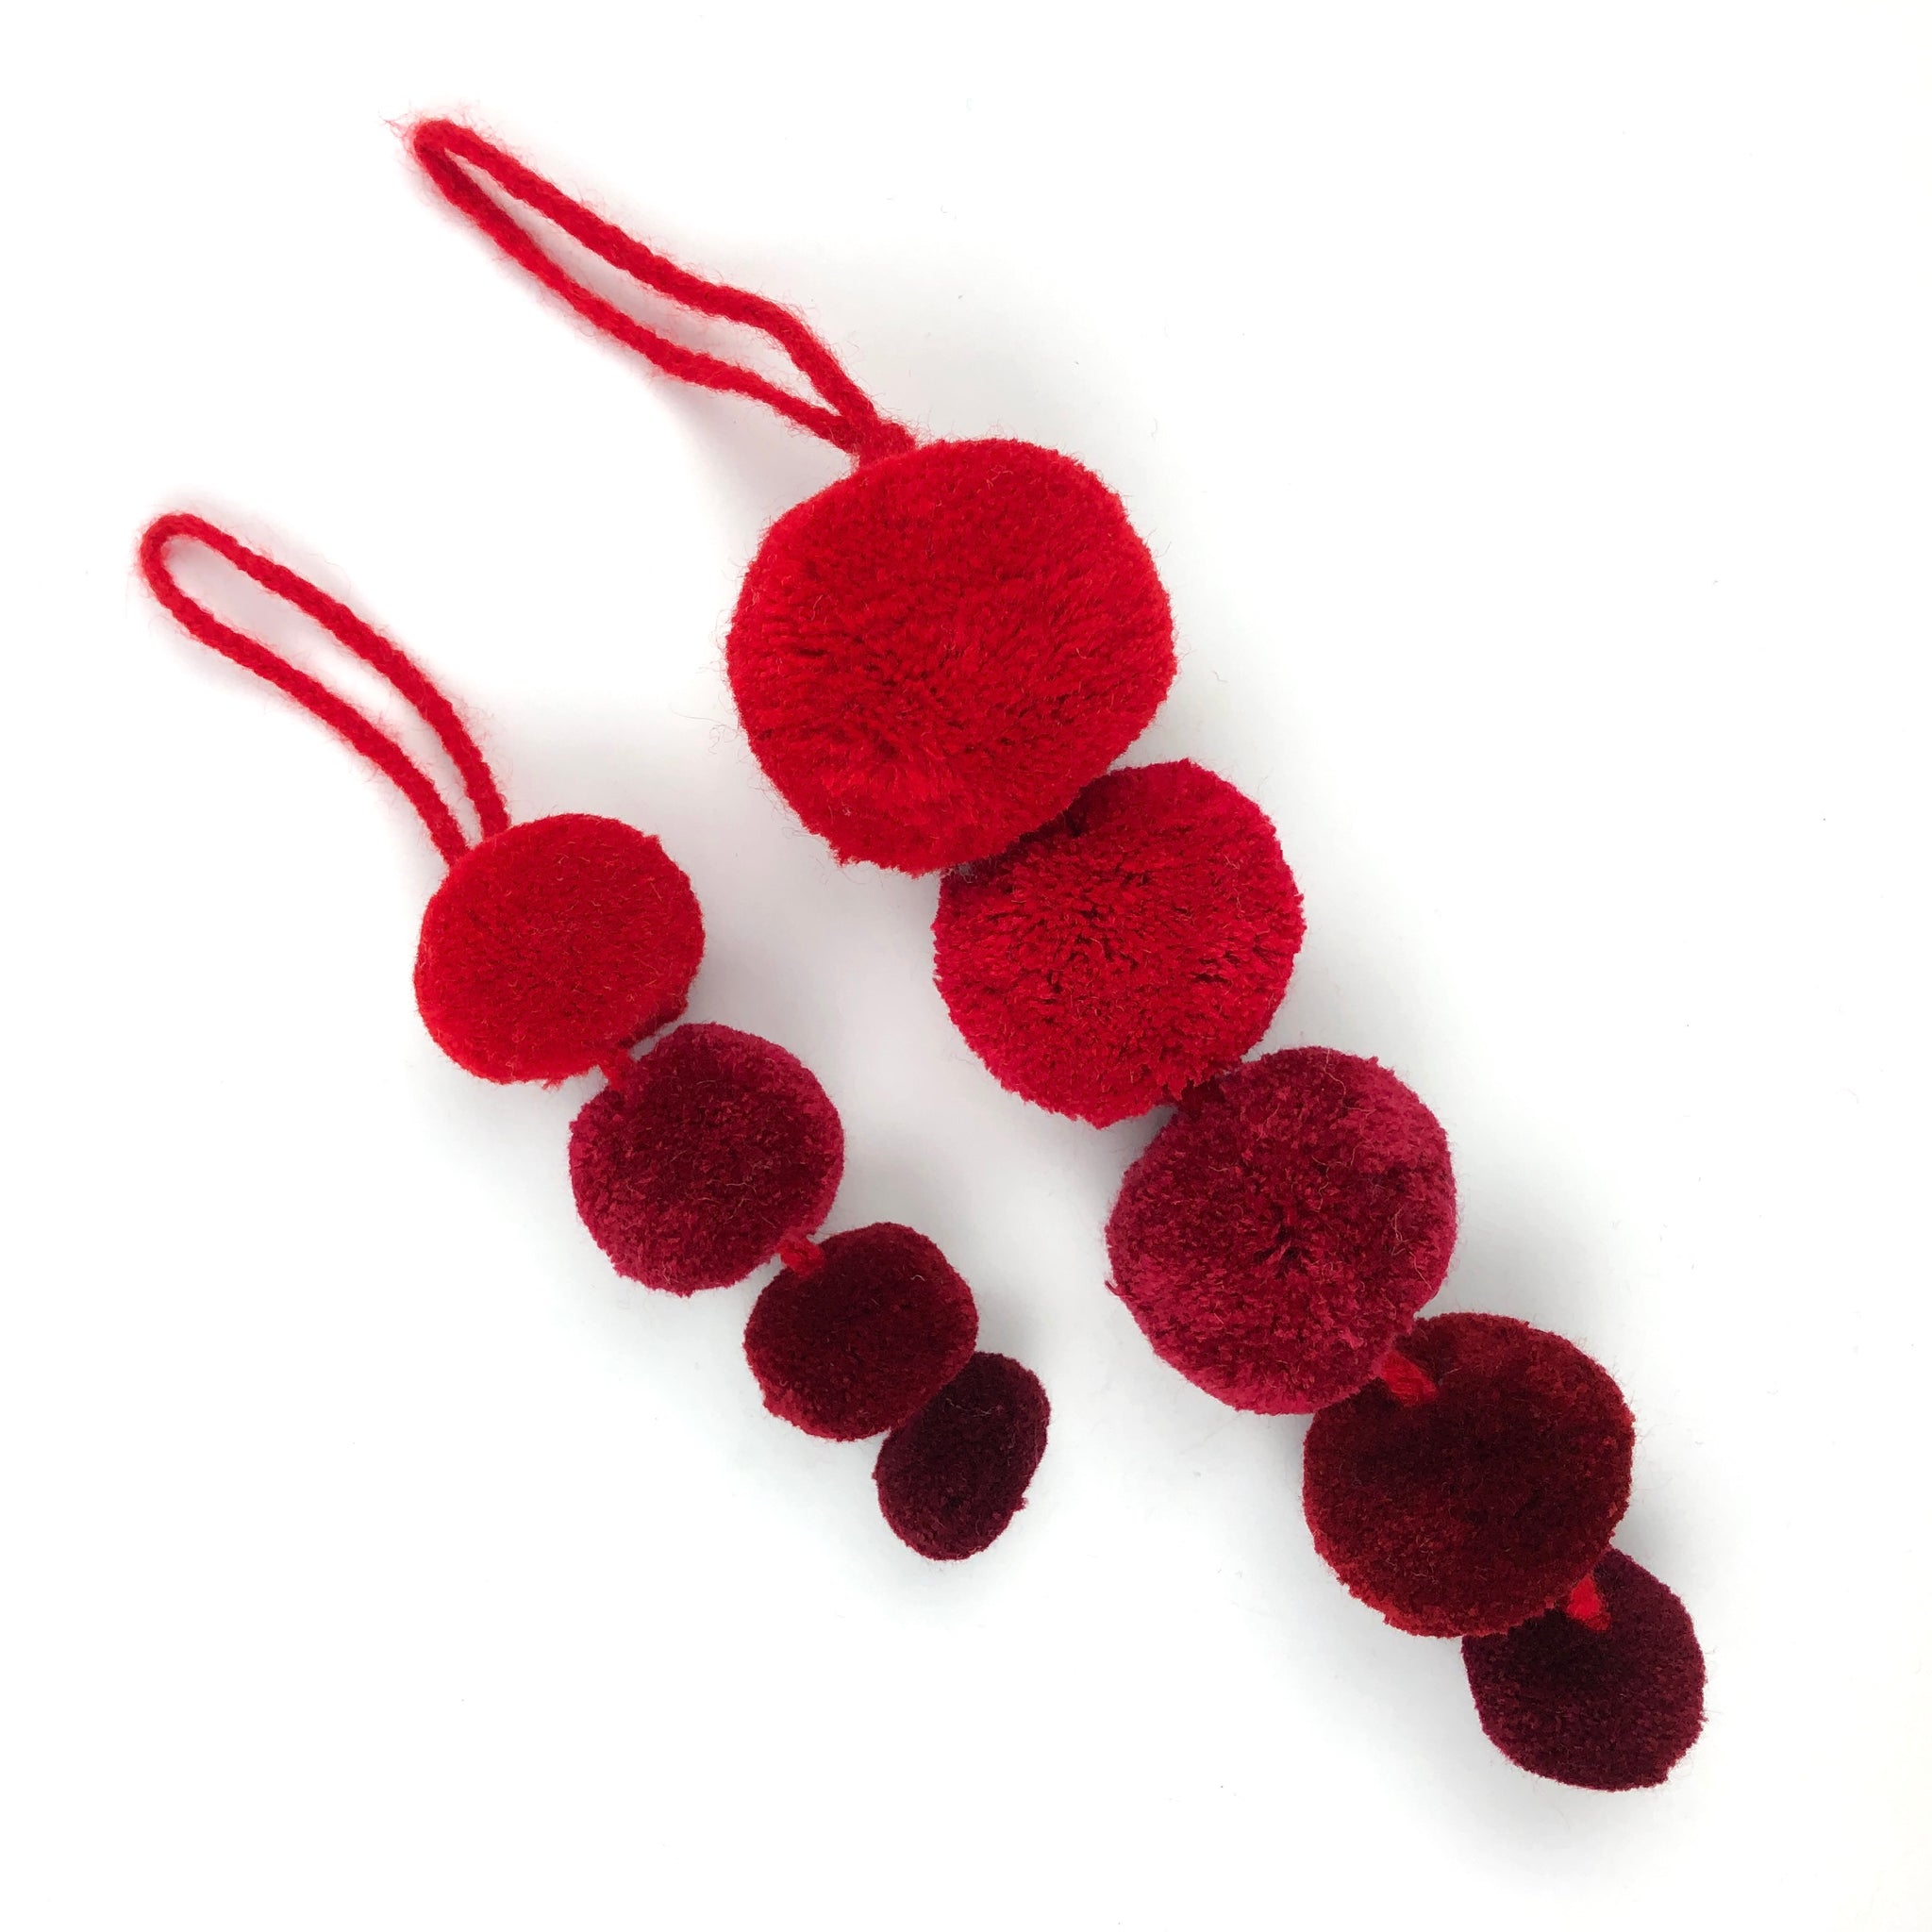 Pompom Ornaments (6 pack)